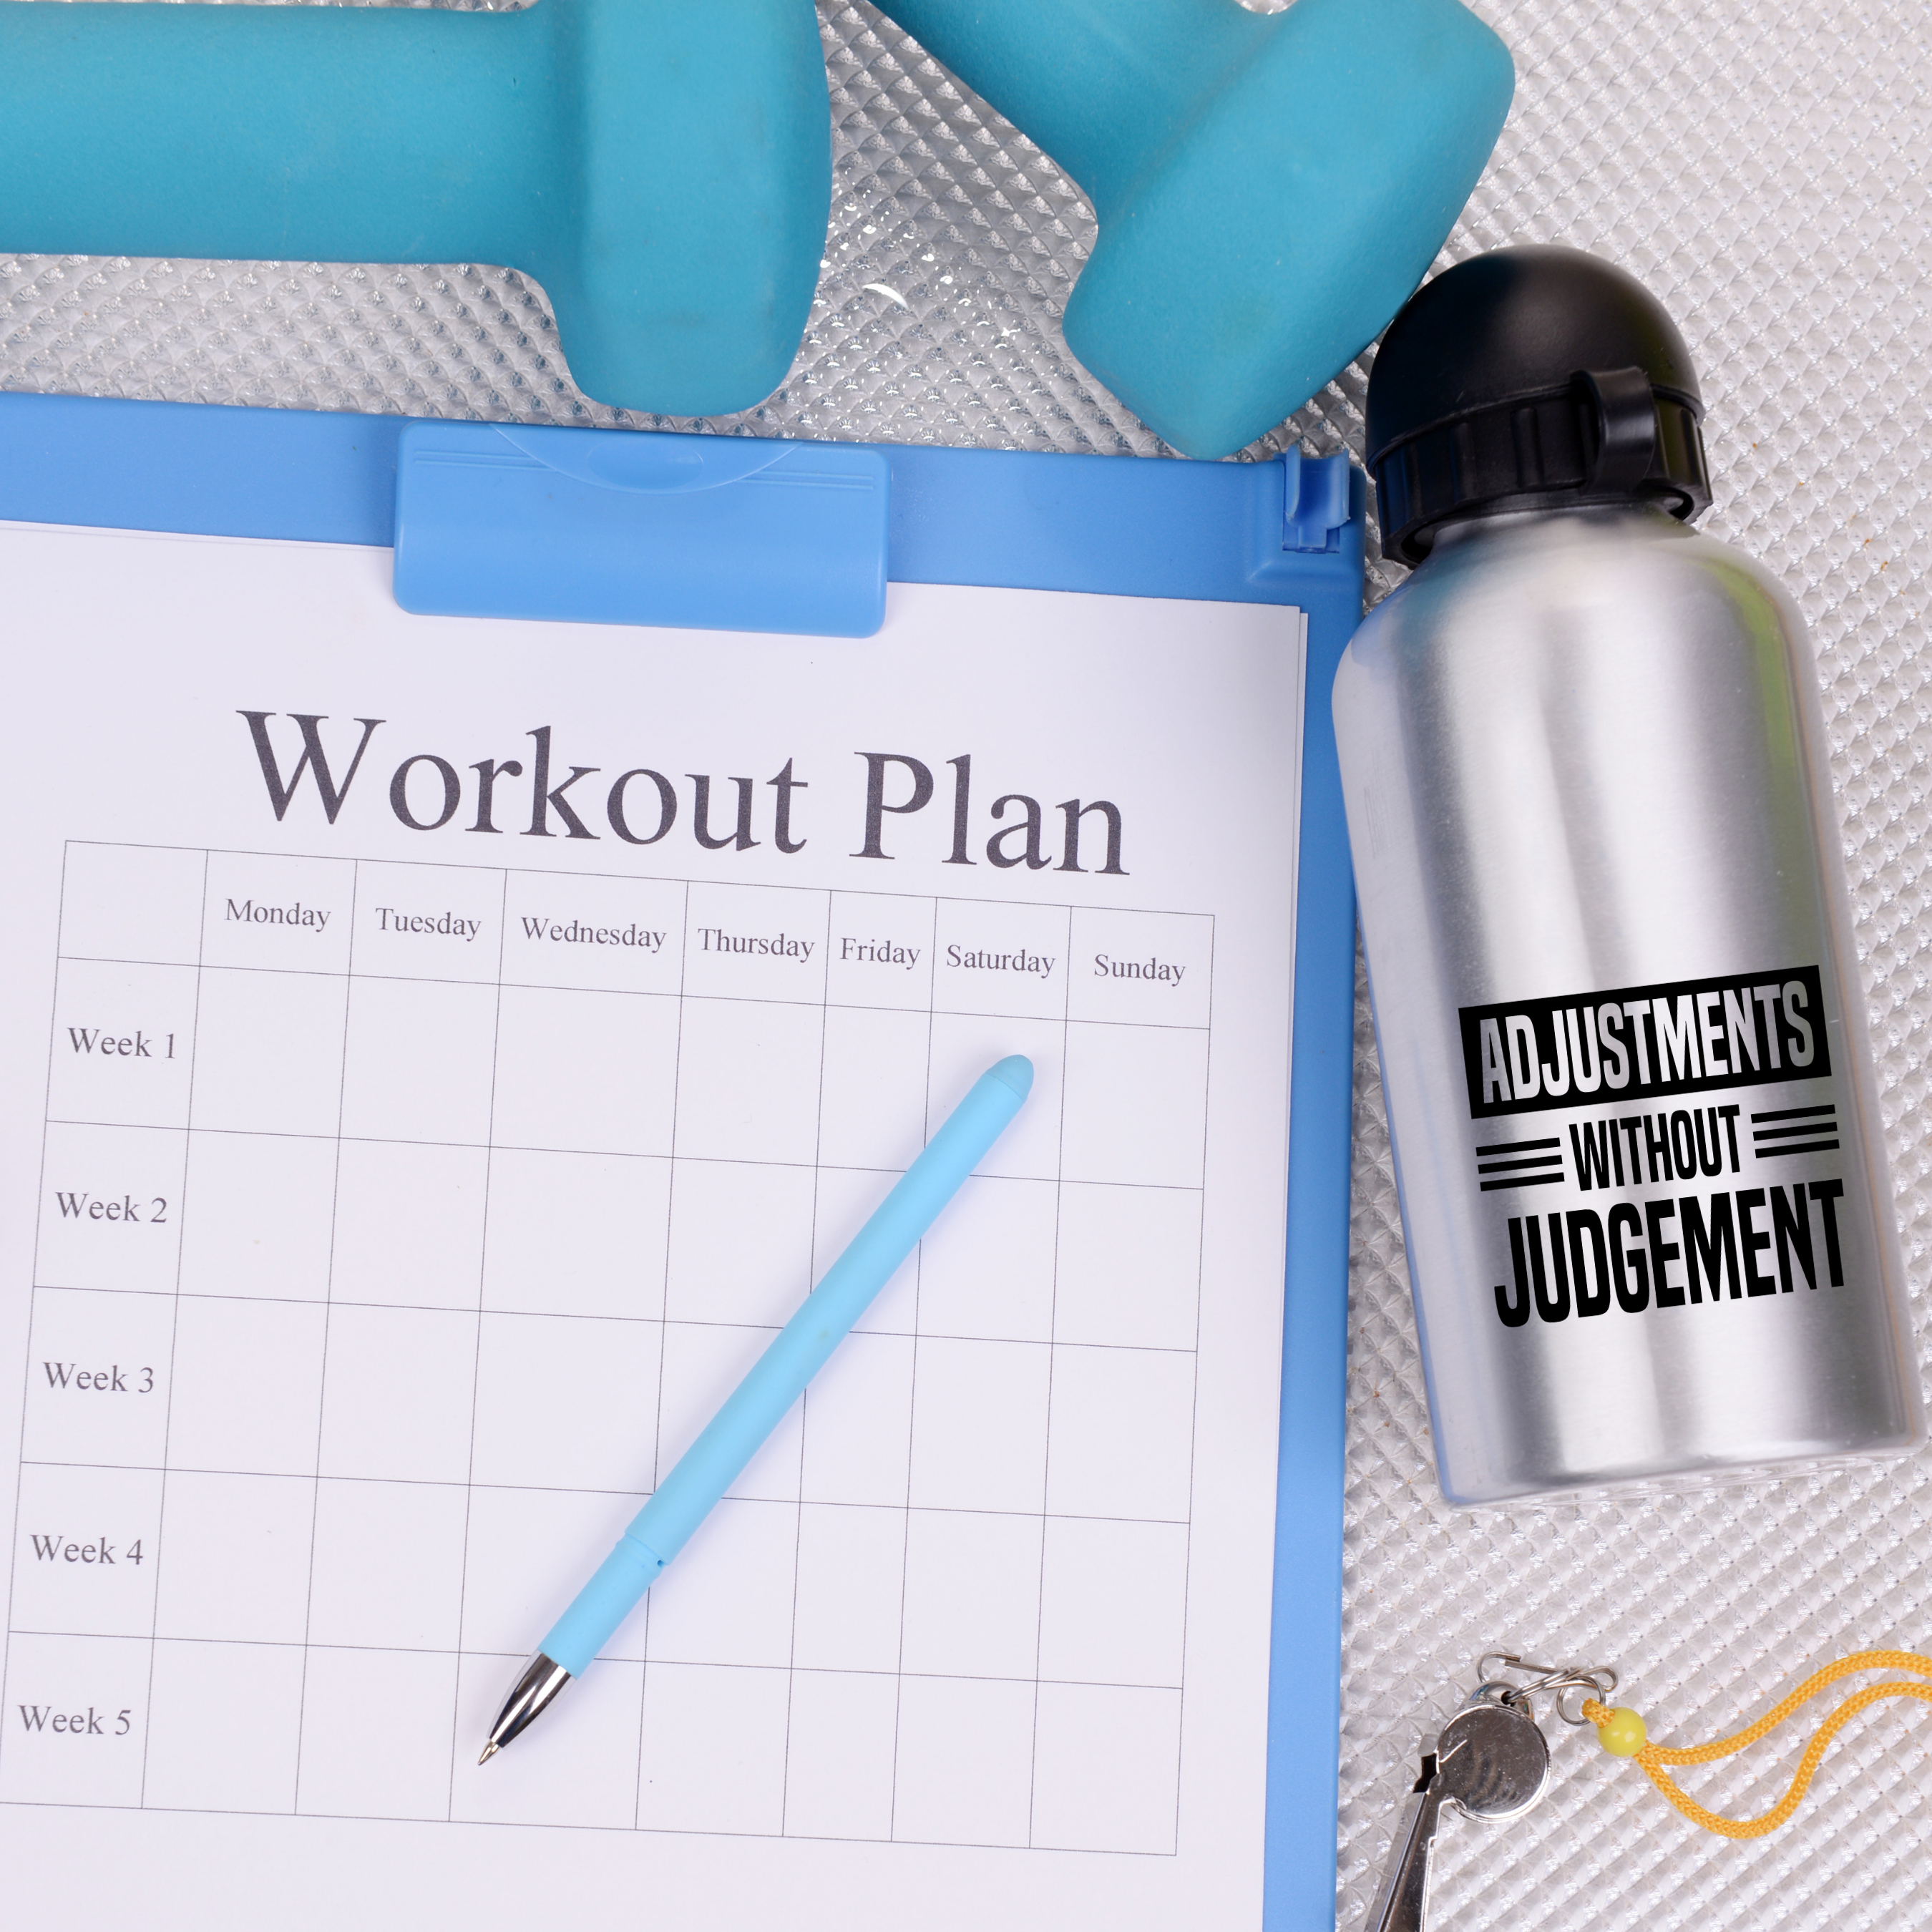 Planning Your Own Workout Program: The Basics